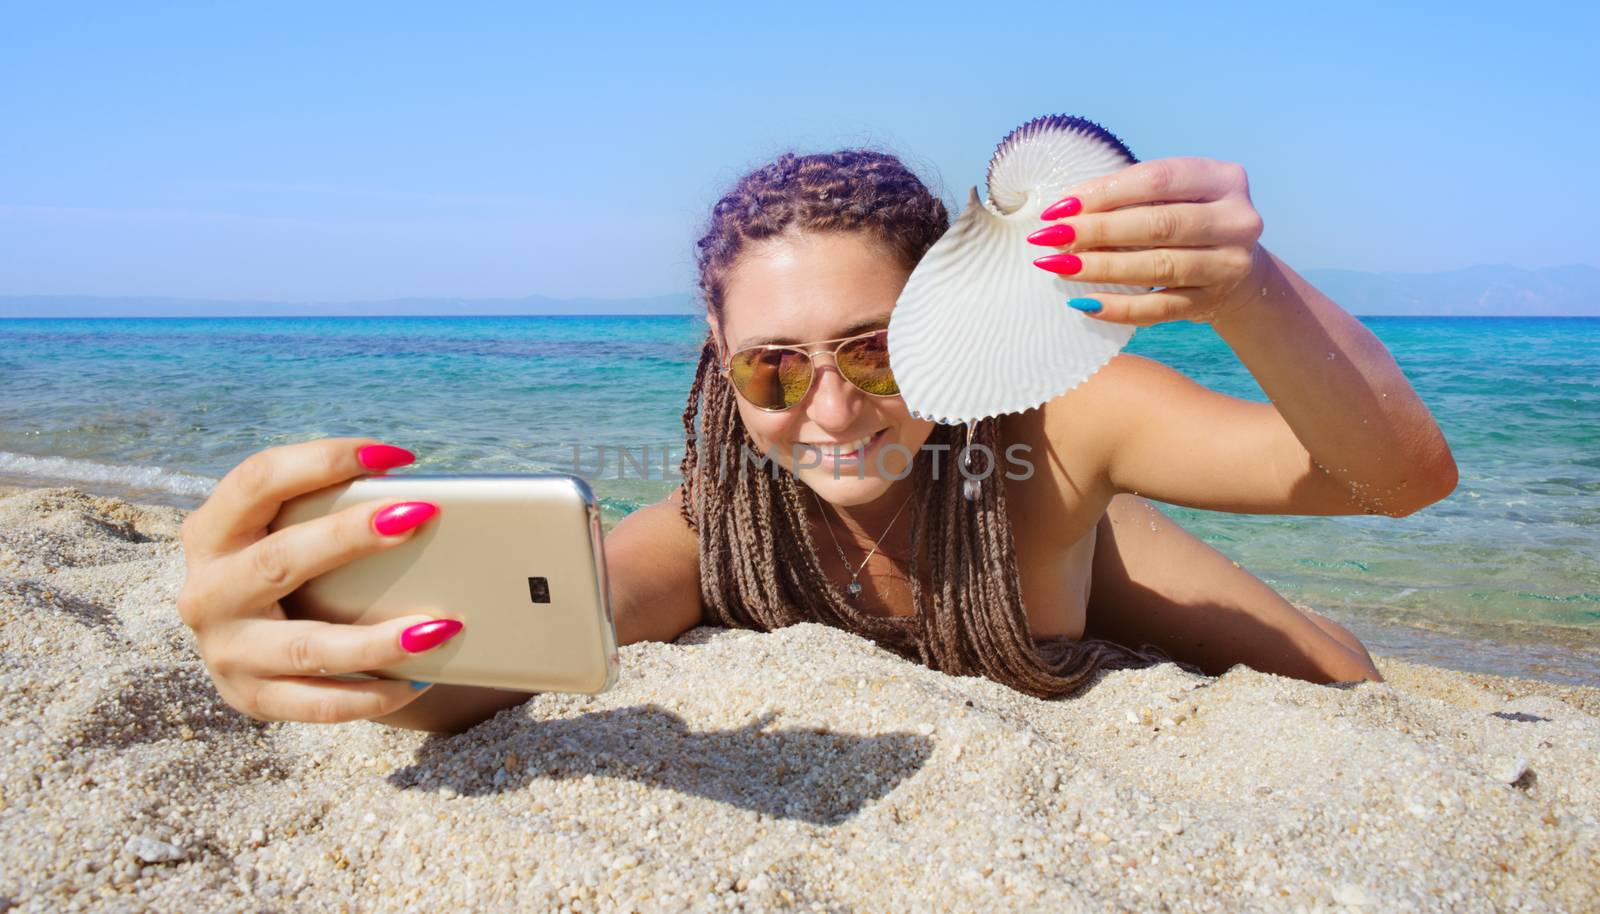 Gorgeous female is making selfie with smartphone lying on a sandy beach of a beautiful distant sea shore, holding nautilus shell.